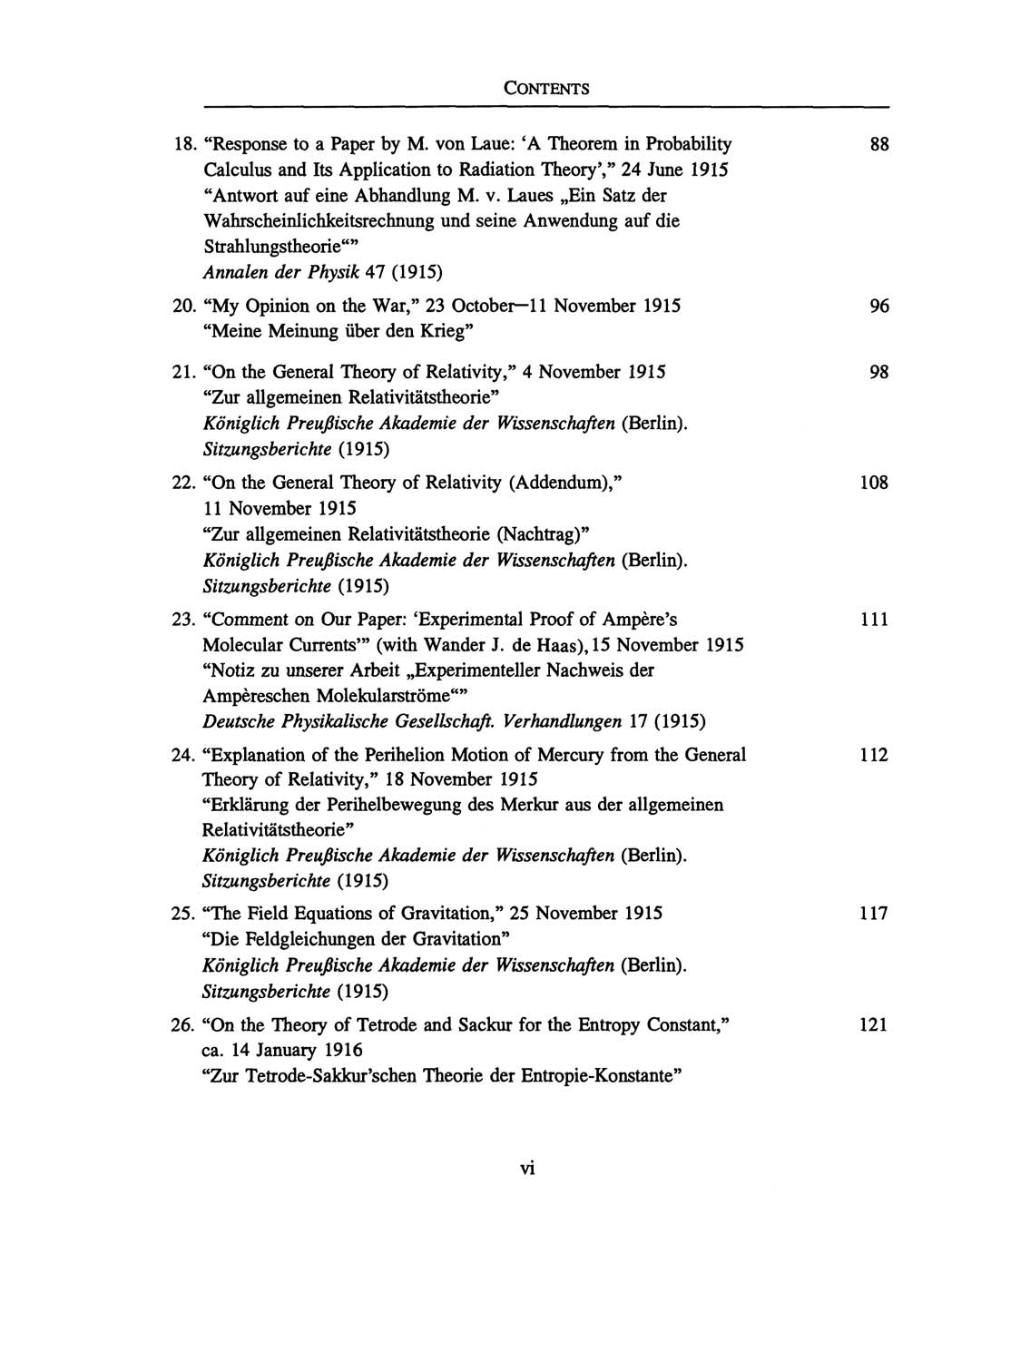 Volume 6: The Berlin Years: Writings, 1914-1917 (English translation supplement) page vi